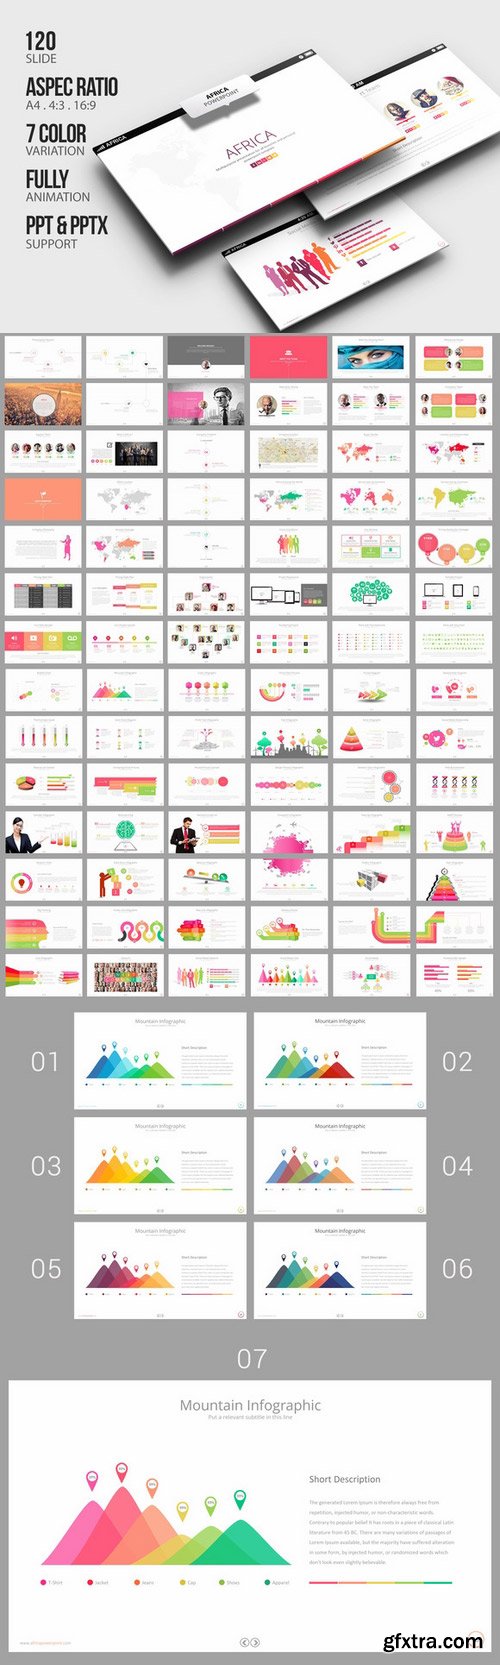 CM - Africa Powerpoint Template 366726